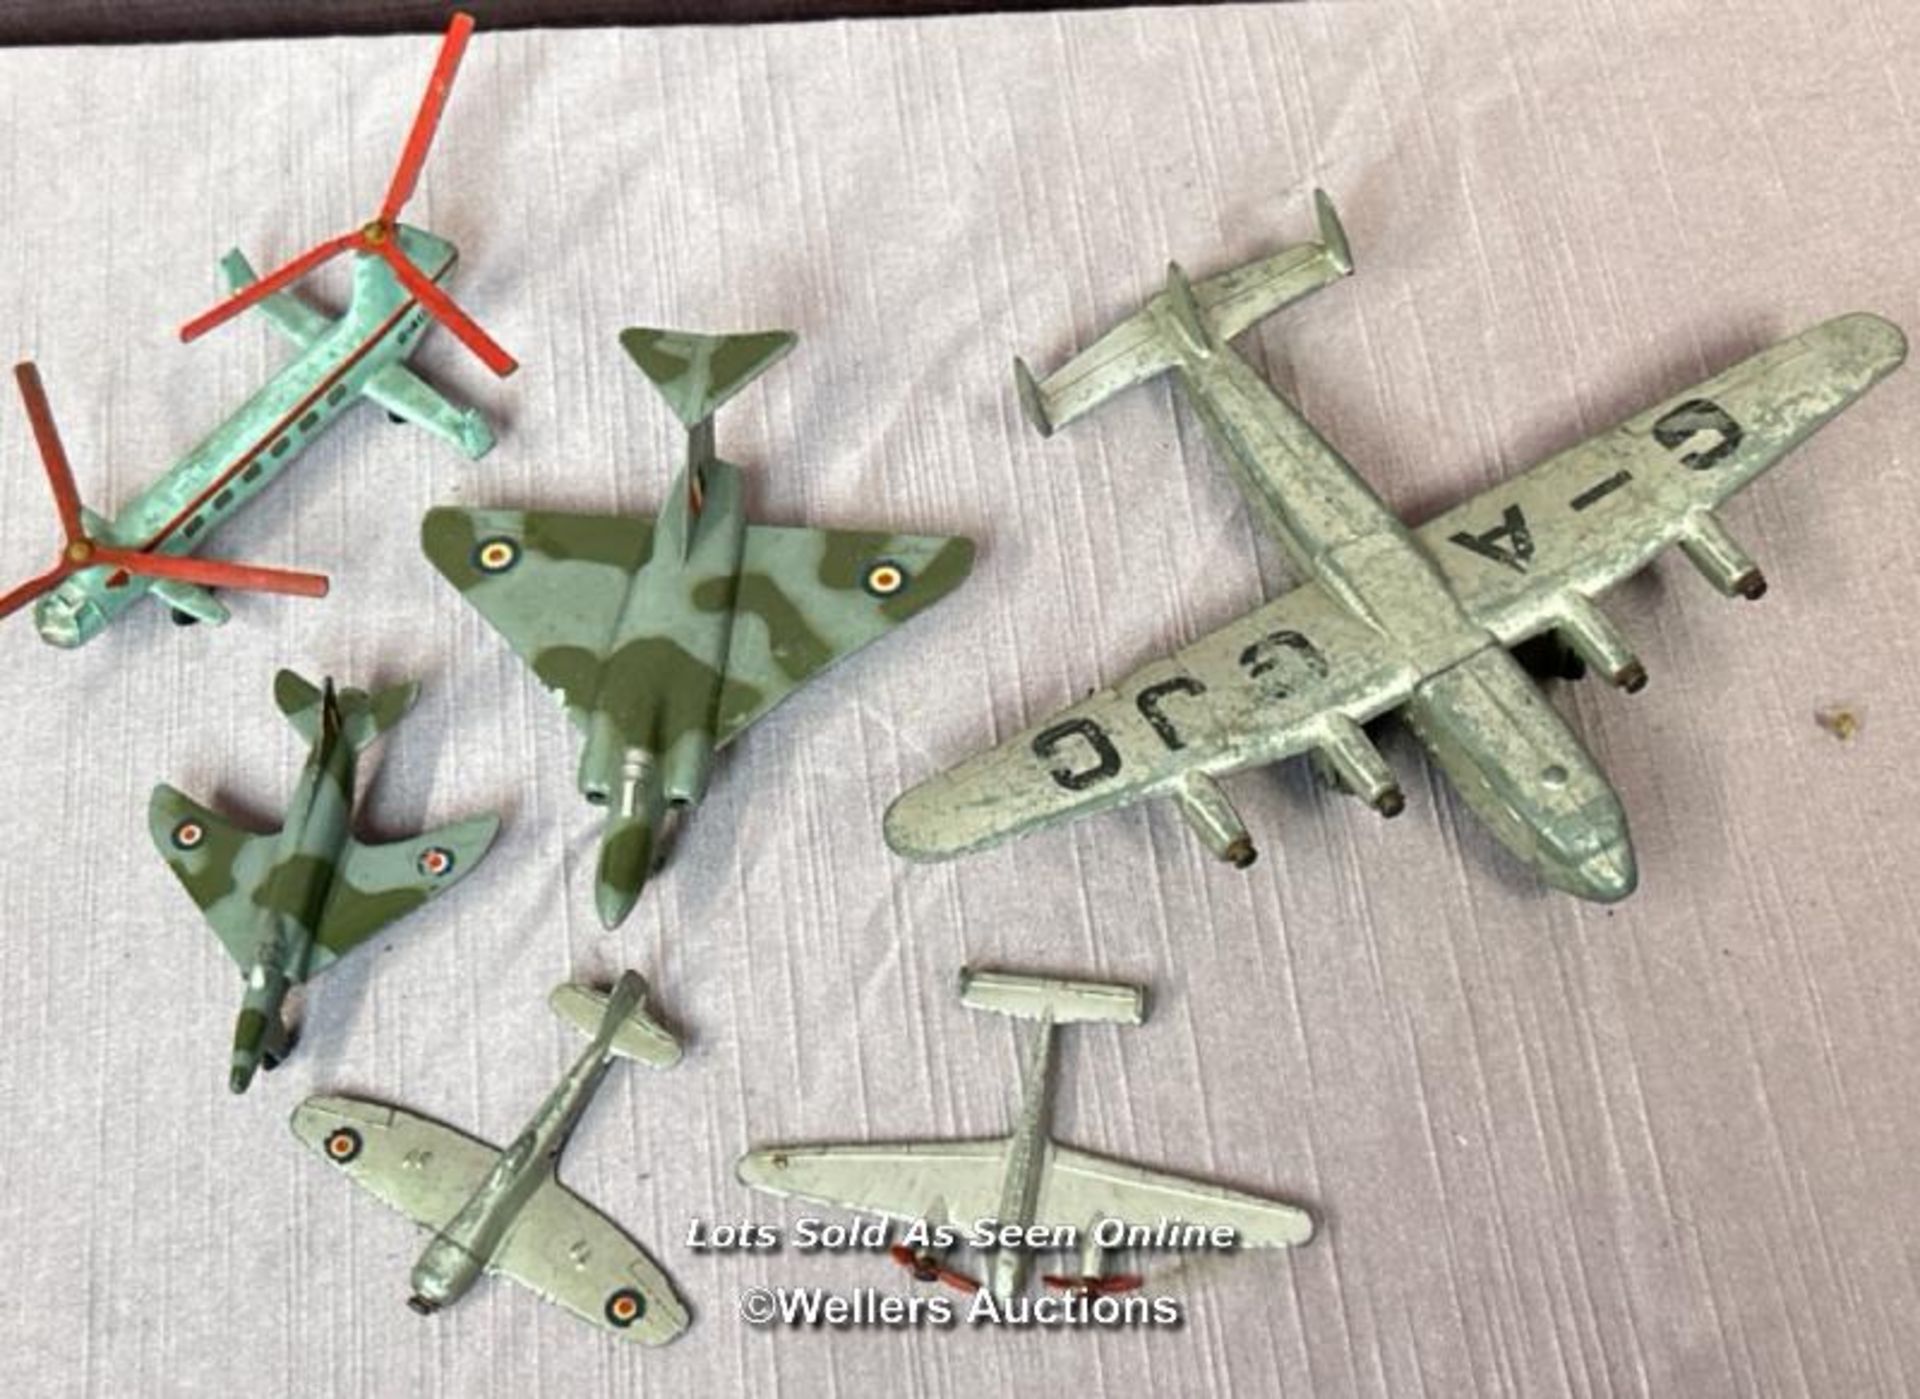 SELECTION OF DINKY DIE CAST PLANES AND A HELICOPTER